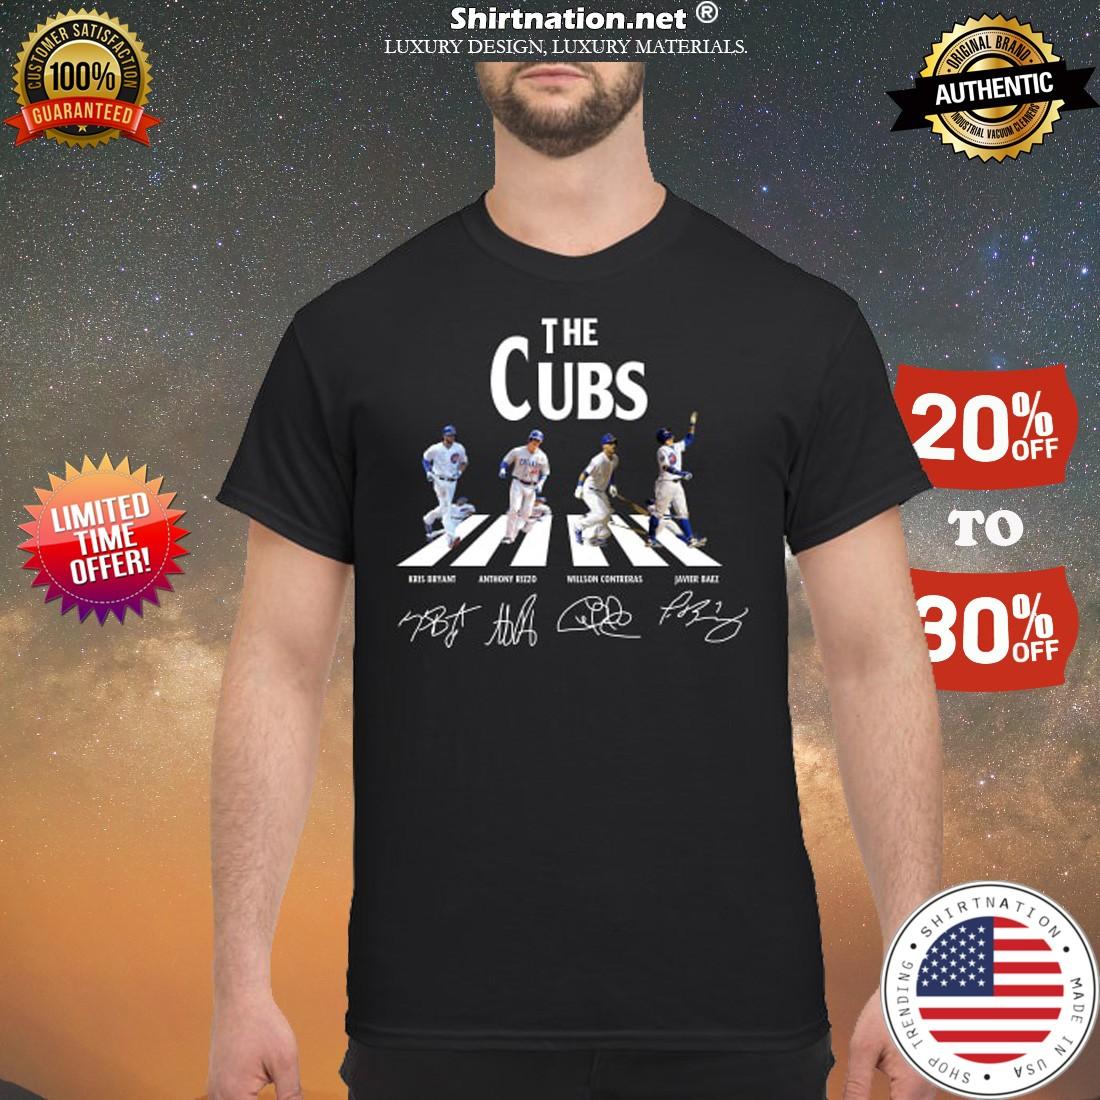 The Cubs abbey road shirt